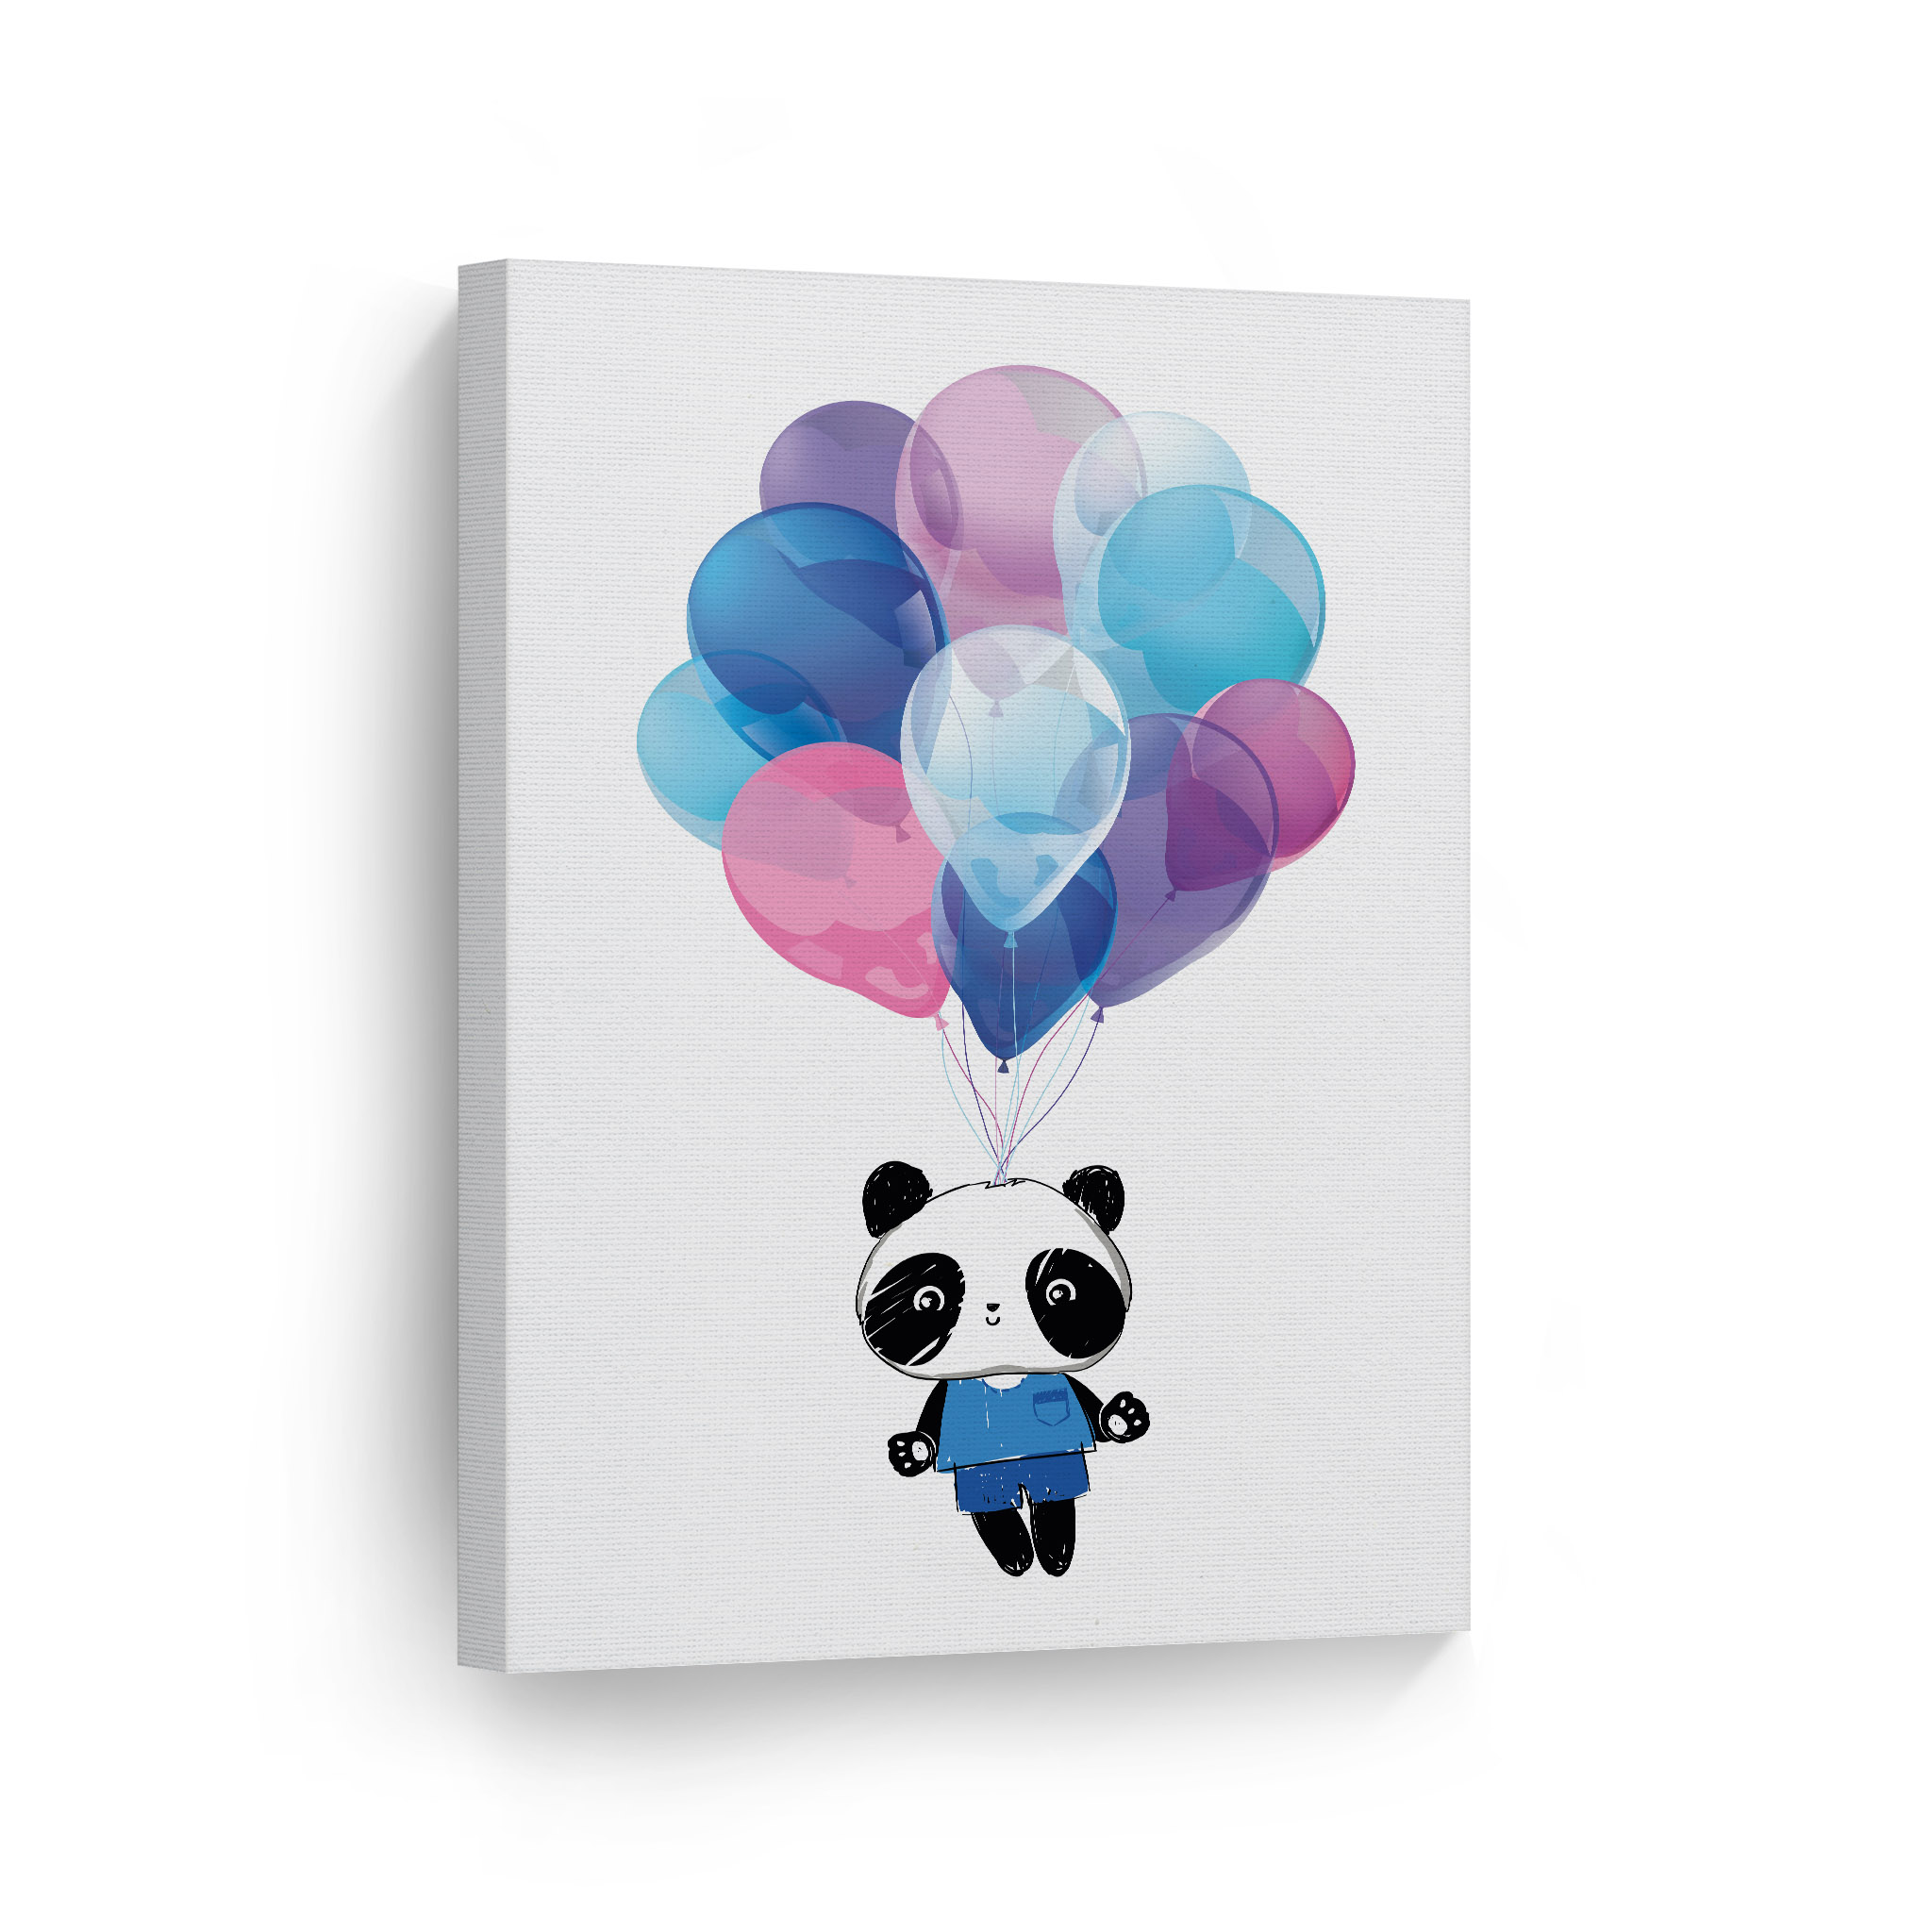 Smile Art Design Flying Cute Baby Panda In Blue Cloth With Colorful Balloons Illustration Animal Canvas Wall Art Print Living Room Bedroom Kids Girl Boy Baby Nursery Room Decor 40x30